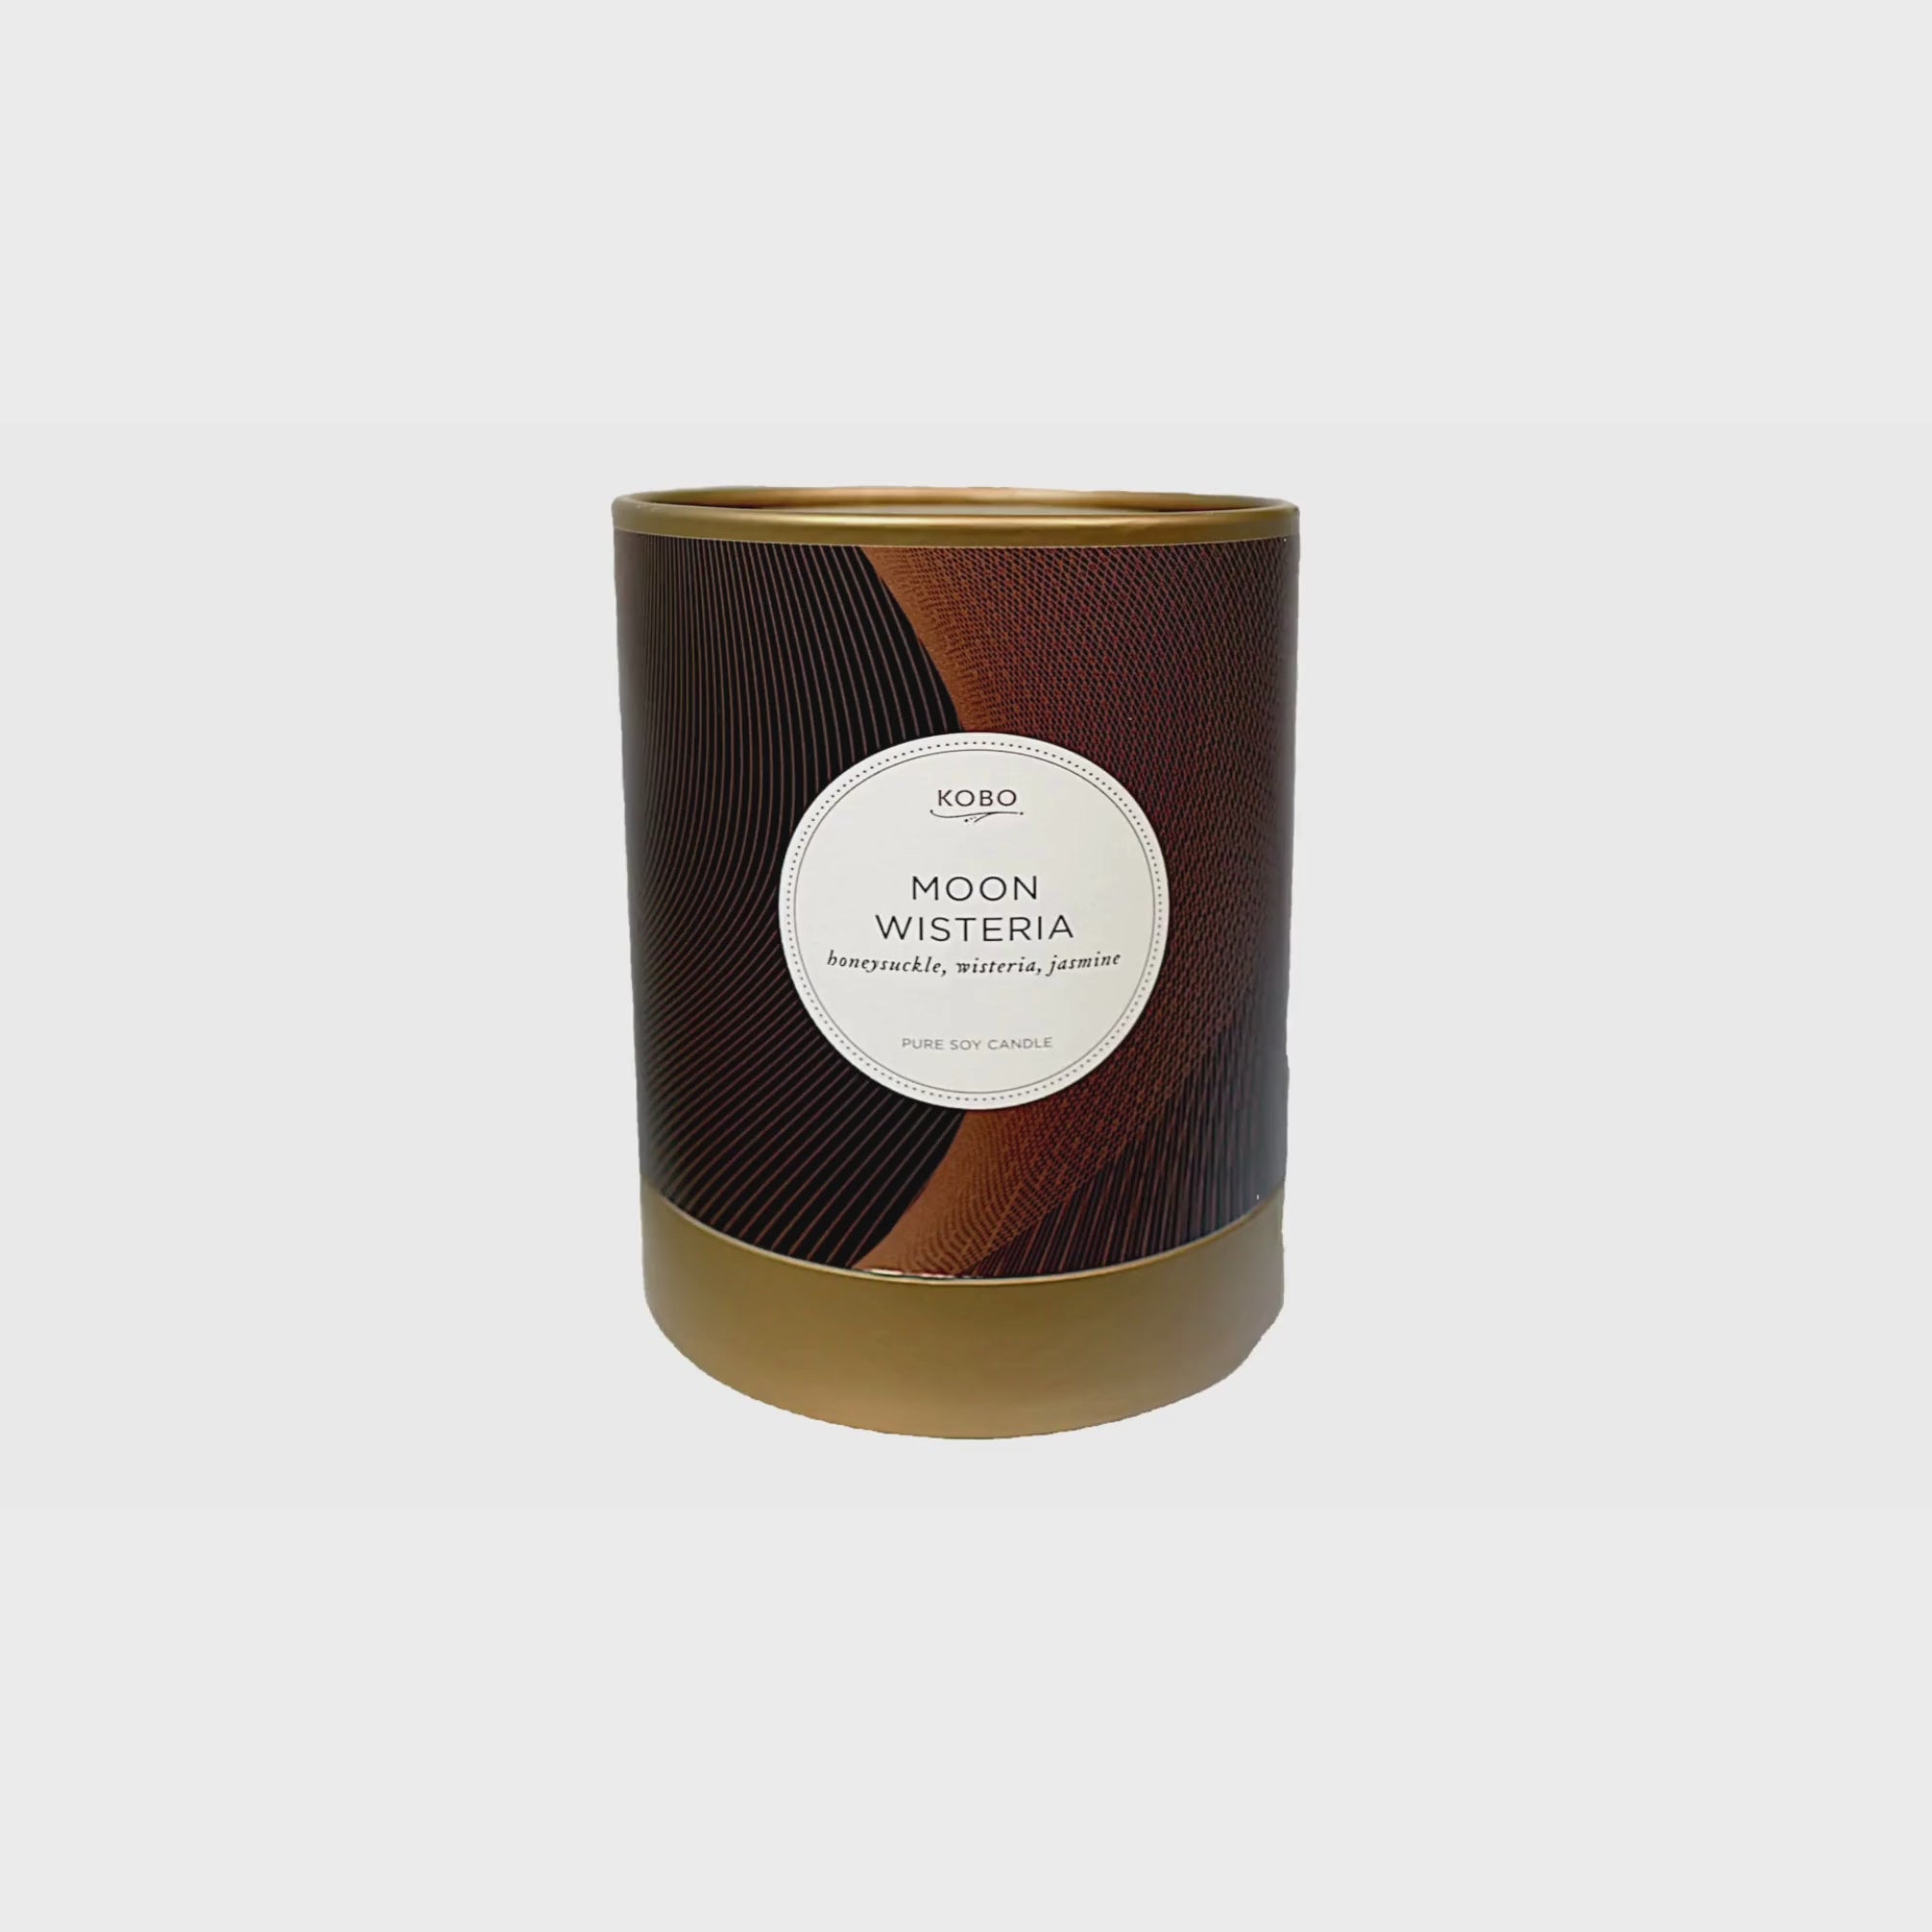 Alternate Image of Moon Wisteria Filament 11 oz Pure Soy Candle